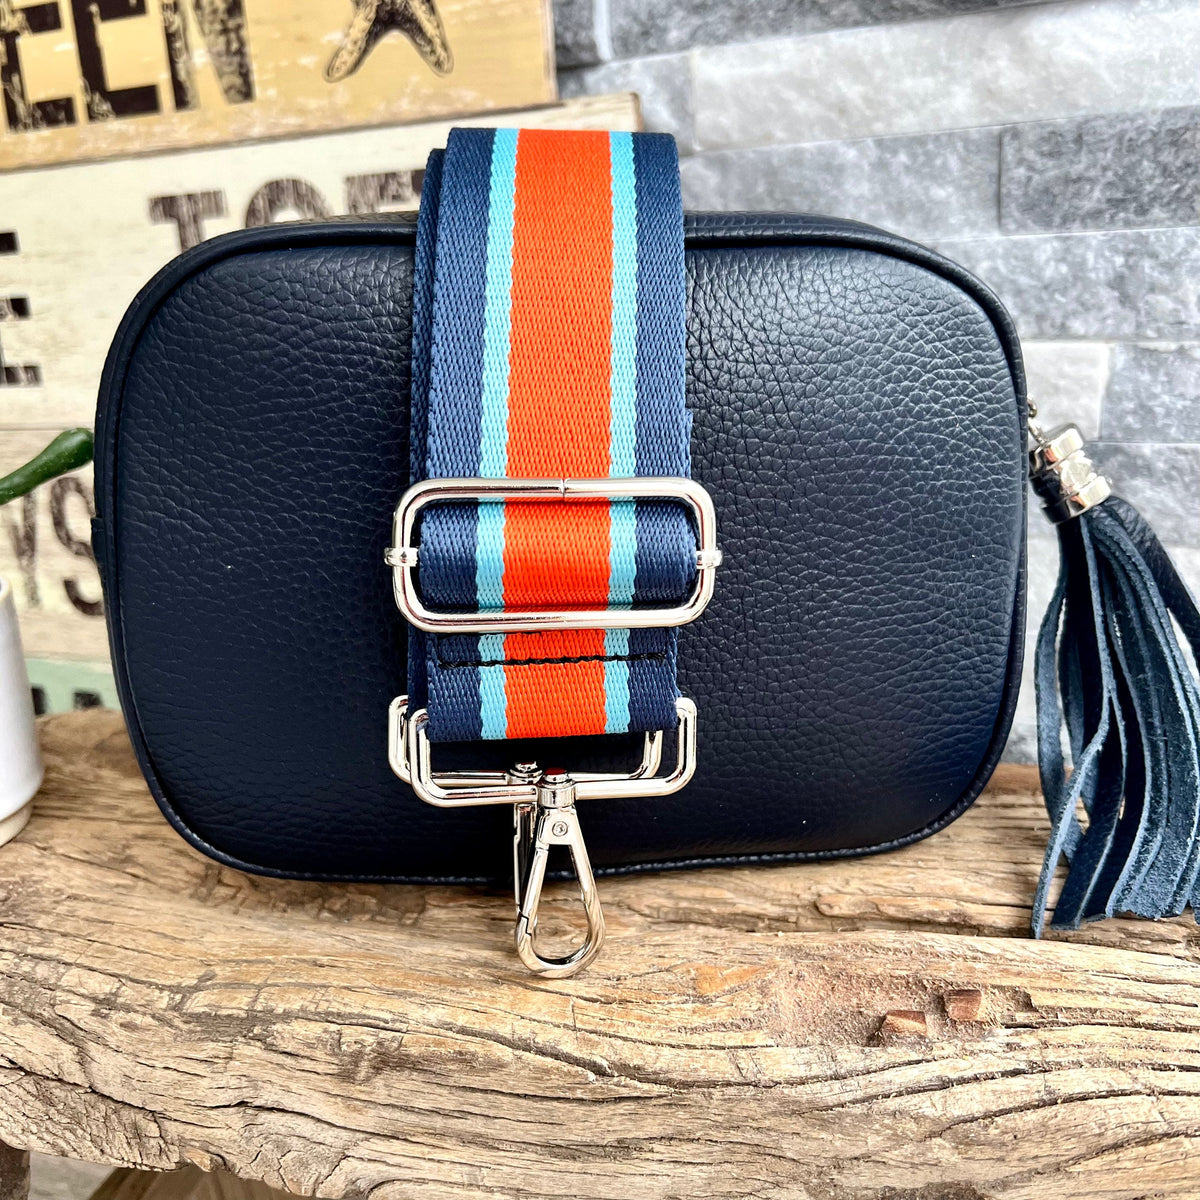 Crossbody Bag In Navy With Interchangeable Straps, B & Floss